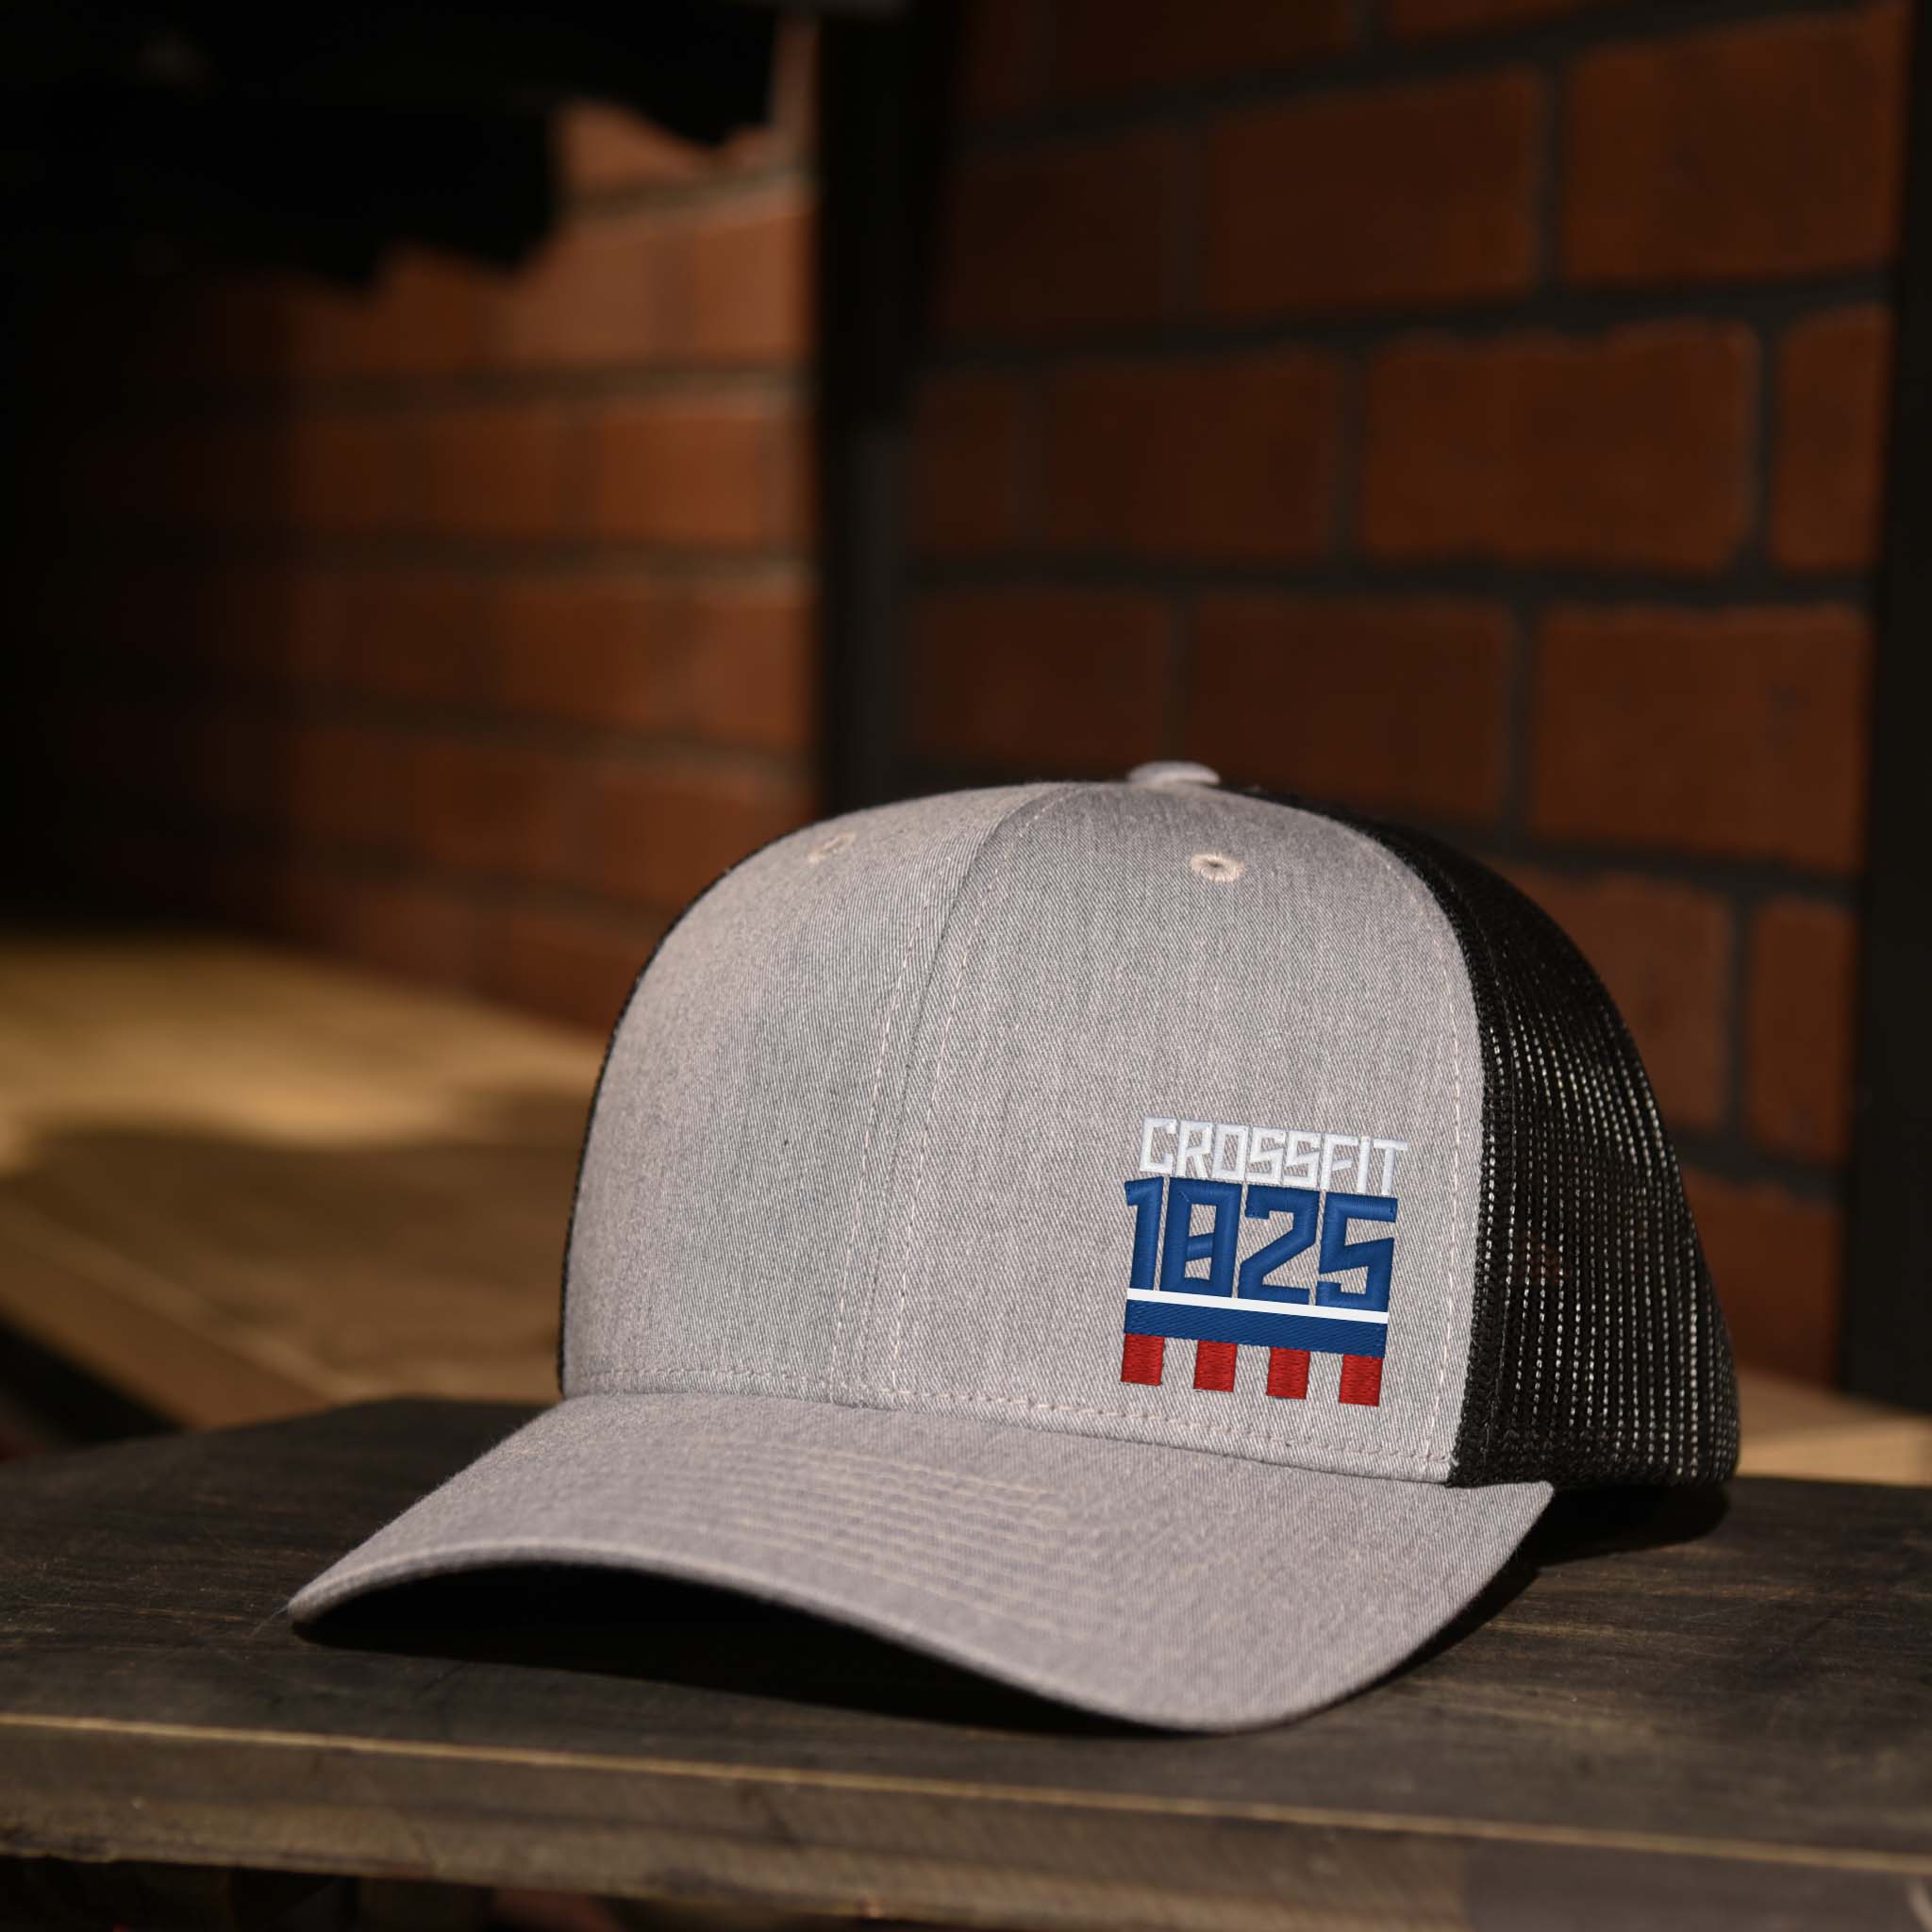 CrossFit 1825 Heather Gray & Black Trucker Hat with Red, White, and Blue Embroidered Logo